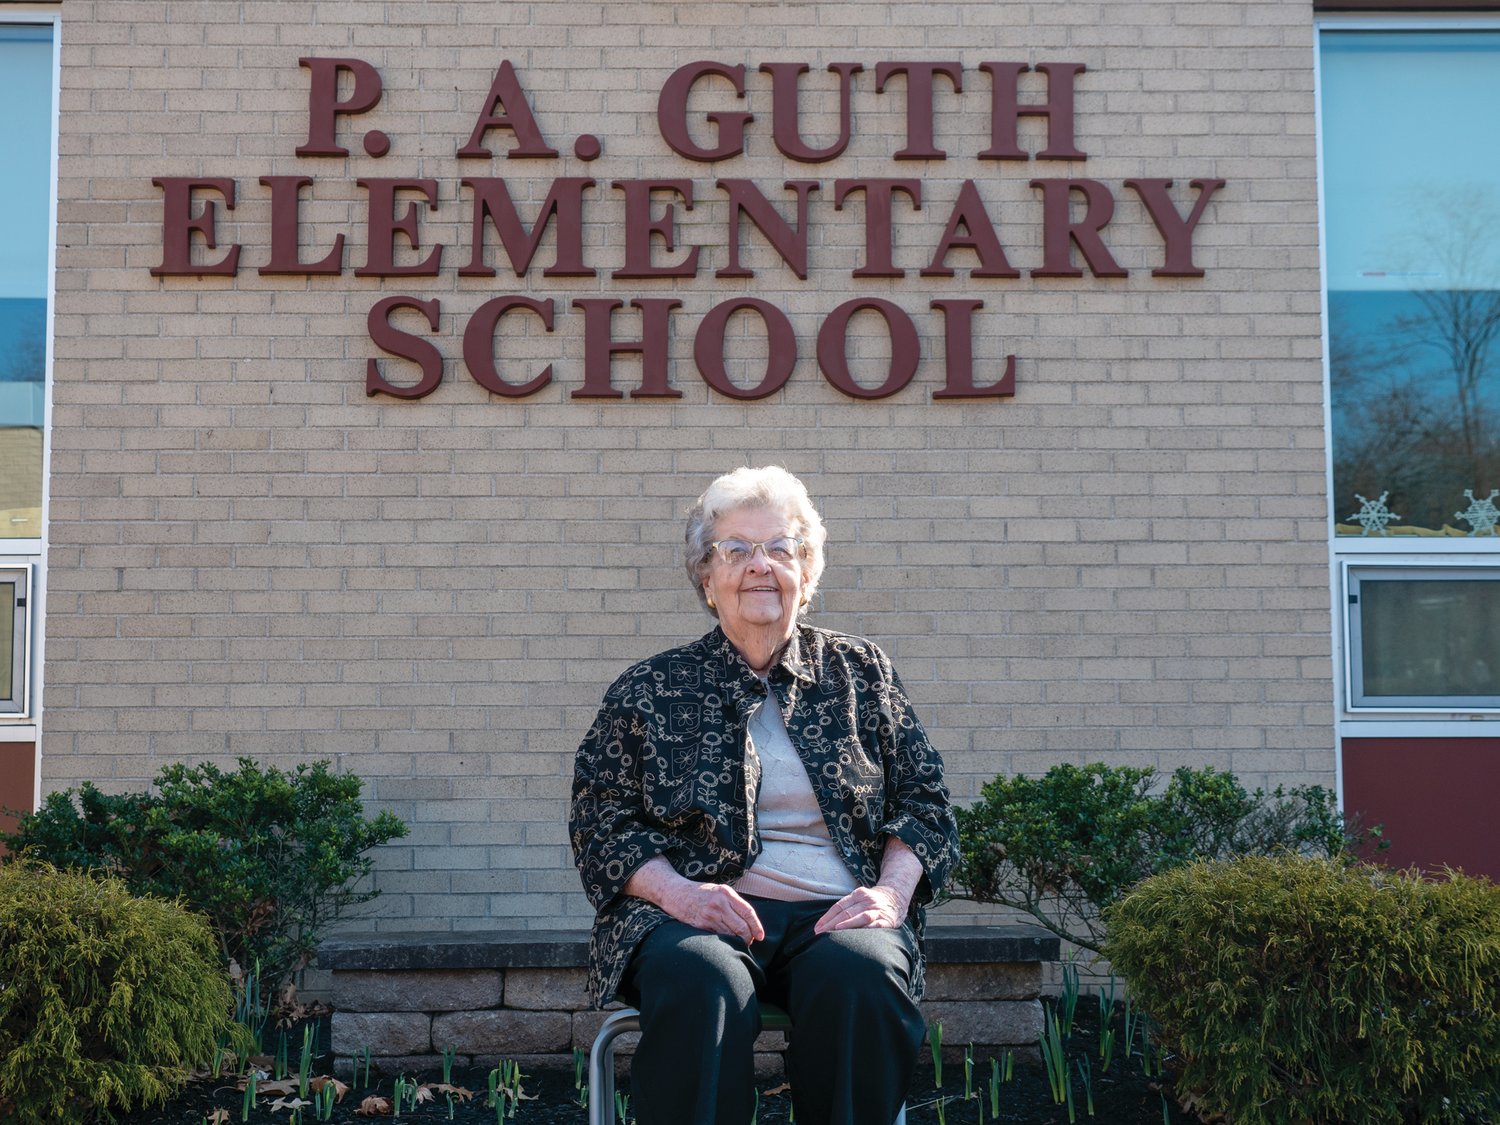 On her 90th birthday, Dr. Patricia A. Guth visited the school in Perkasie that bears her name.